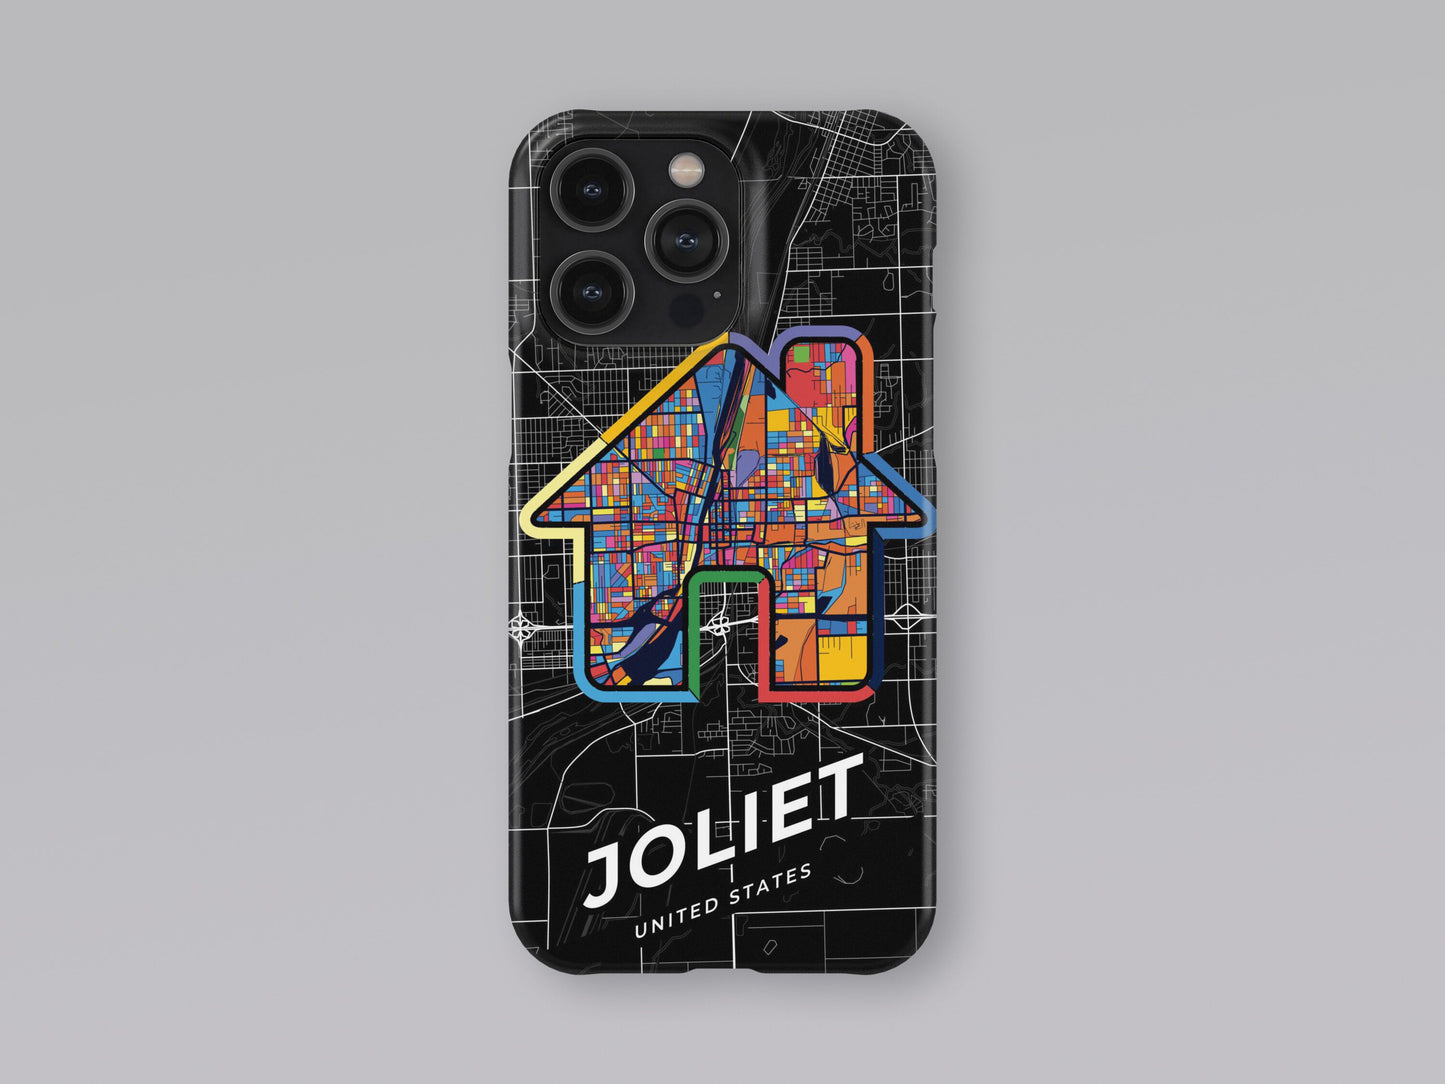 Joliet Illinois slim phone case with colorful icon. Birthday, wedding or housewarming gift. Couple match cases. 3